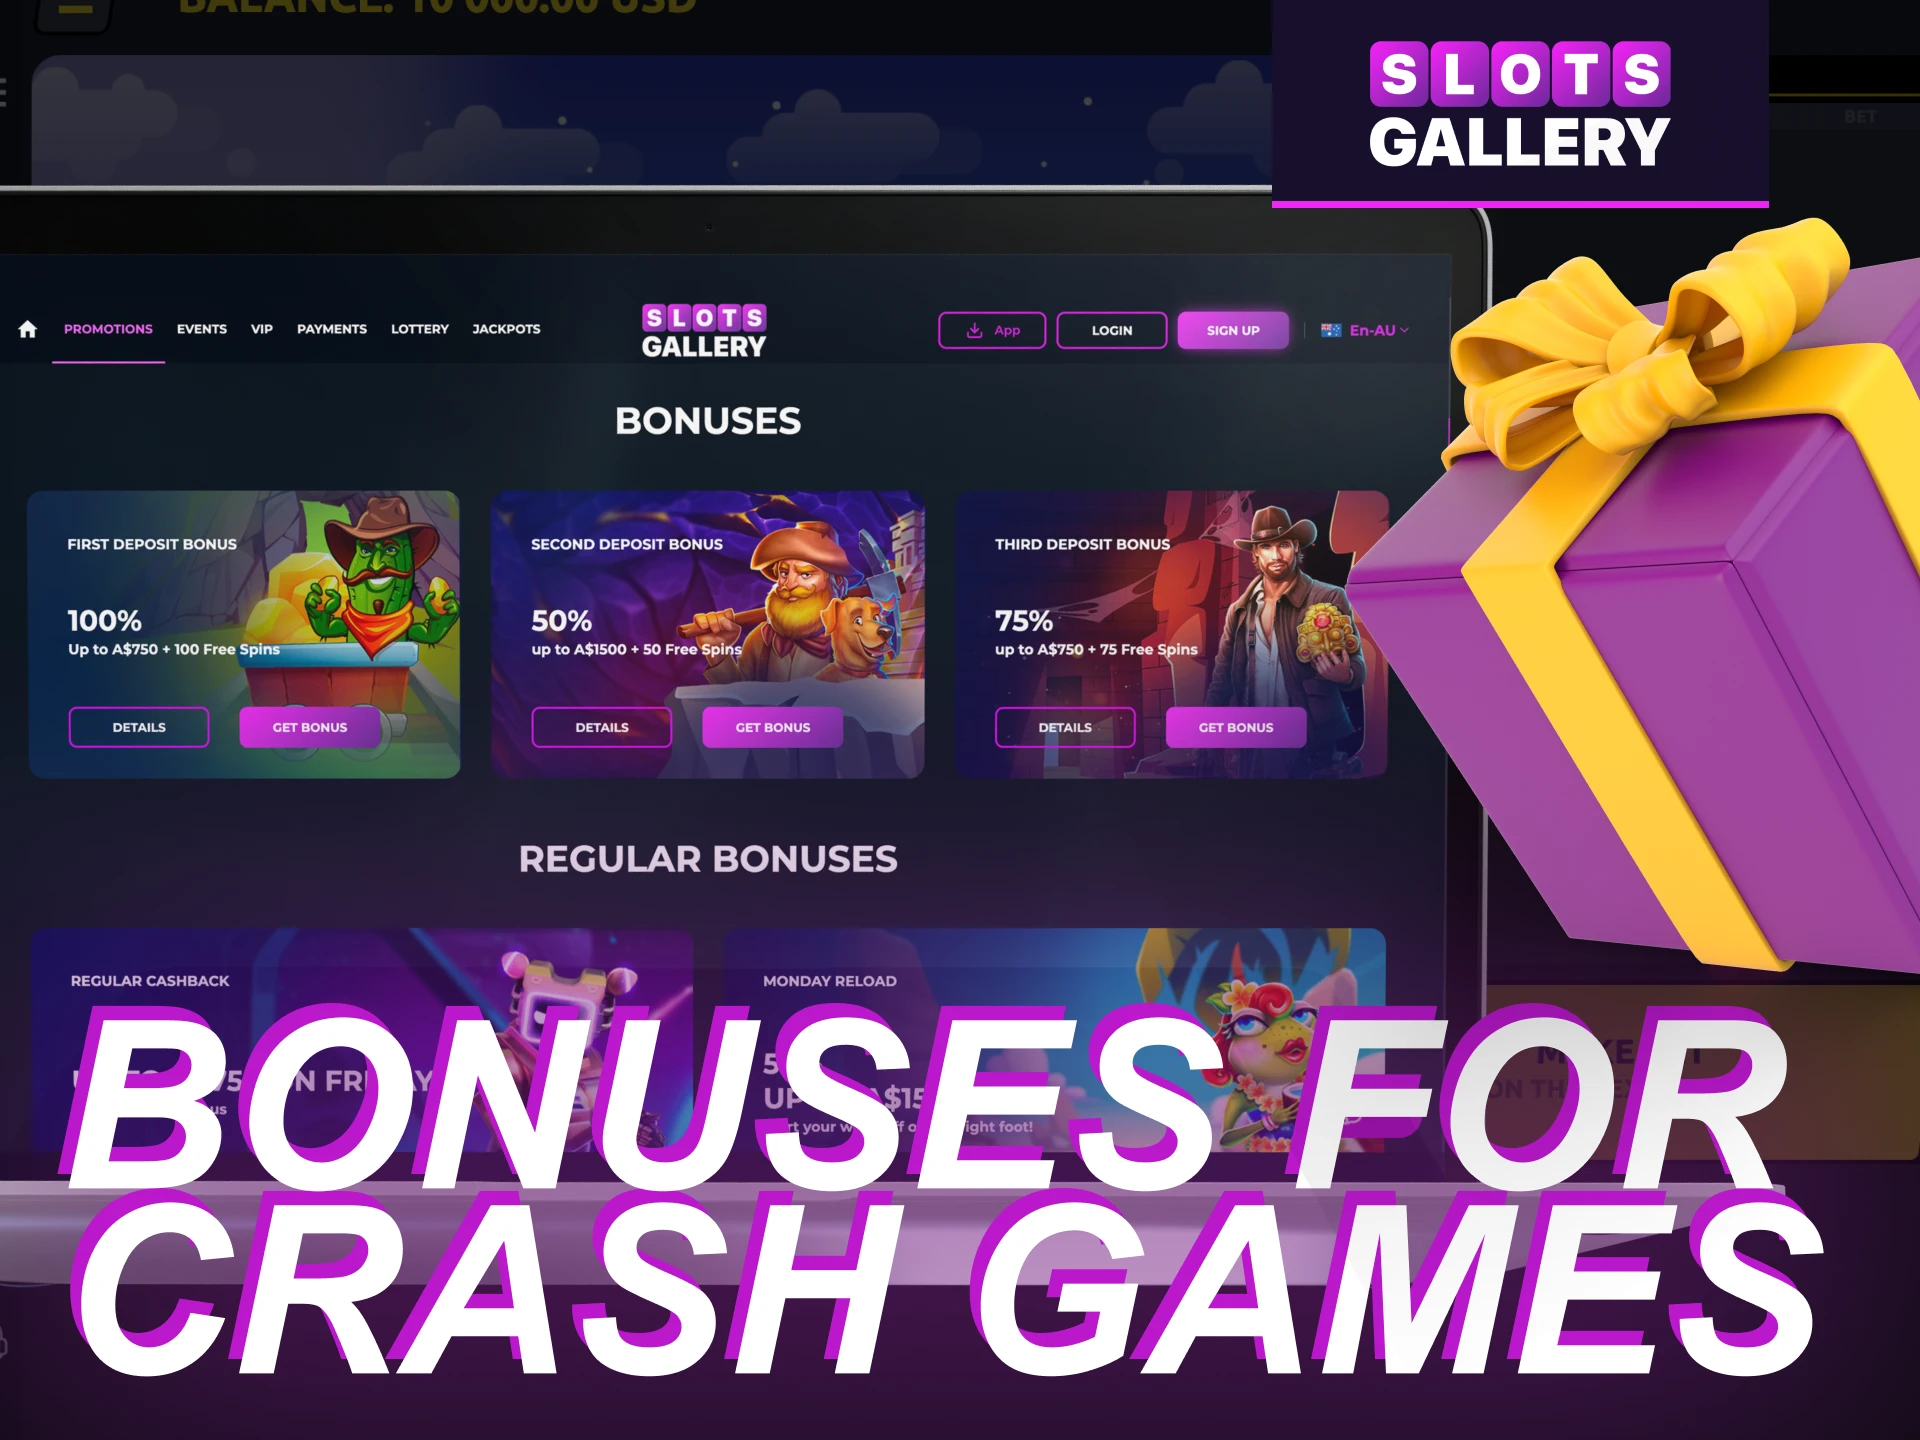 Can I get a bonus in crash games at the online casino Slots Gallery.